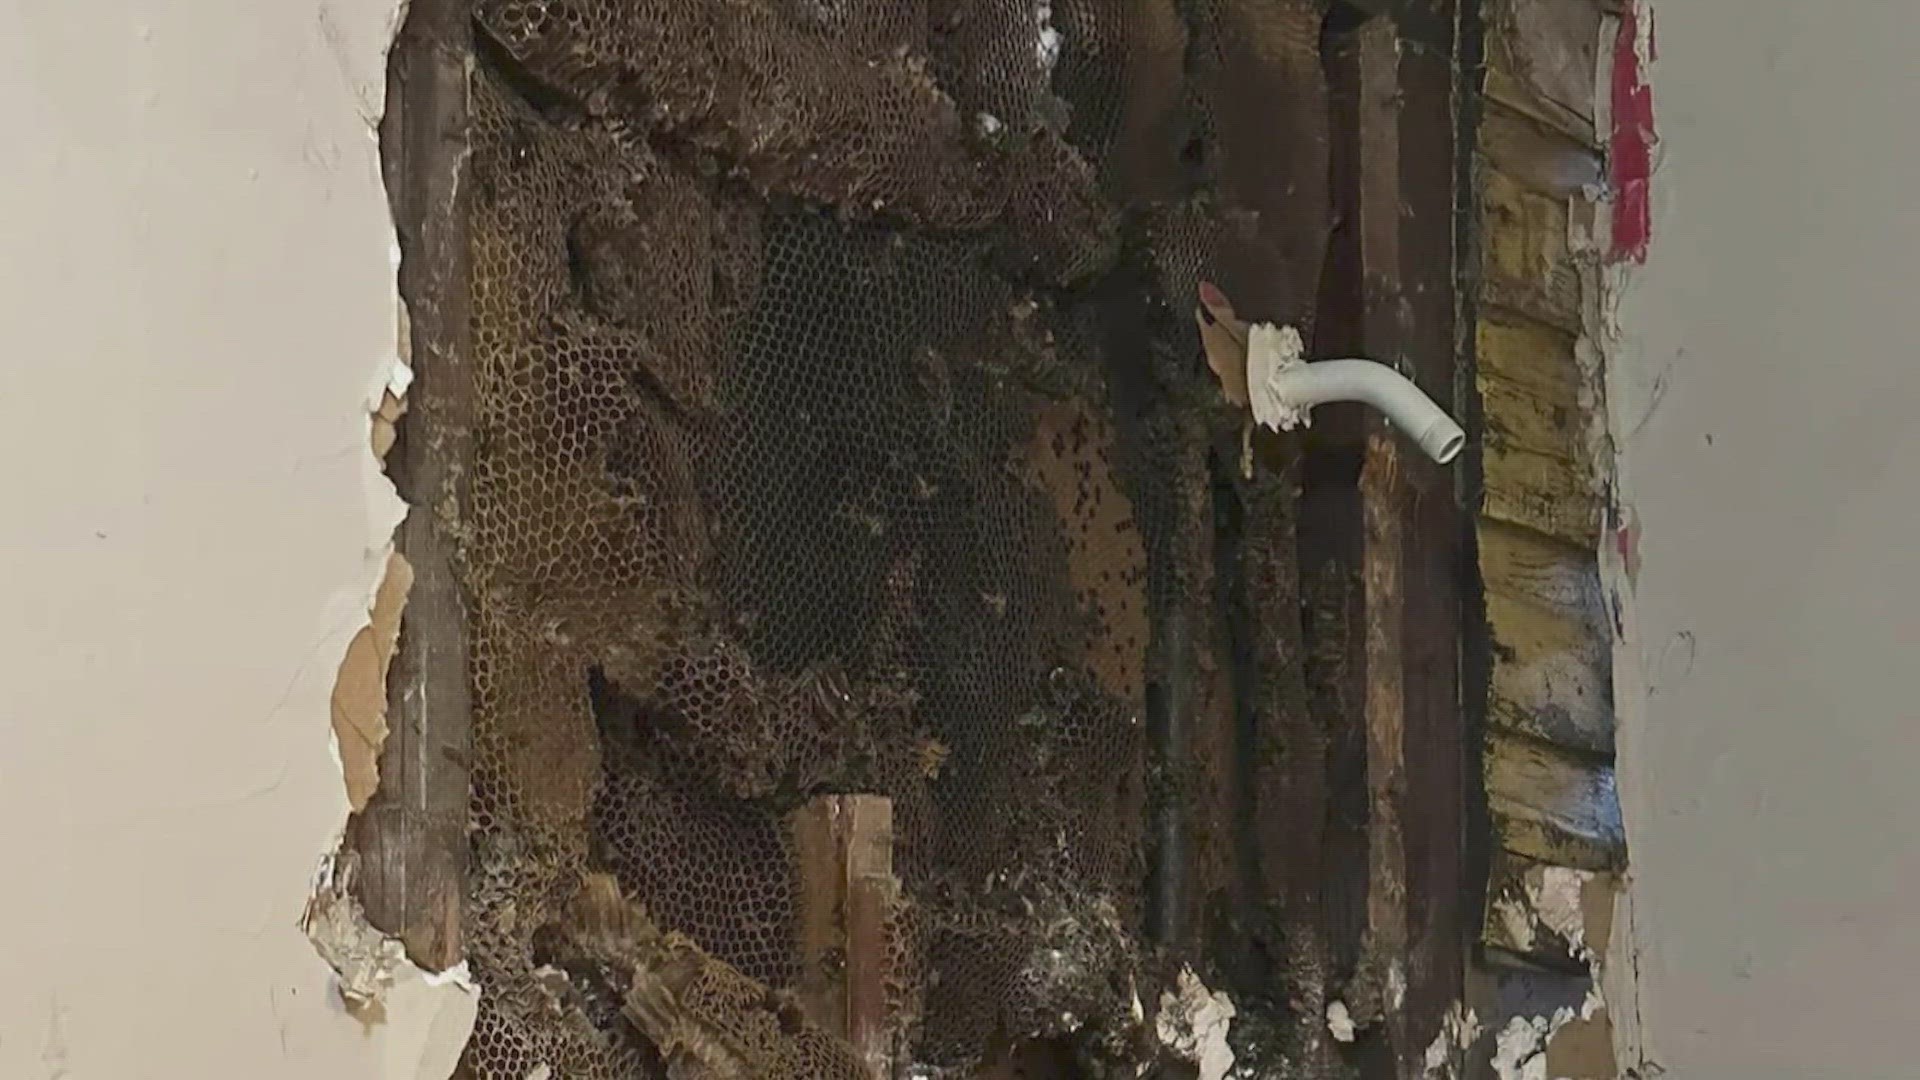 Firefighters used foam to get the bees under control, allowing the victims to escape the home.